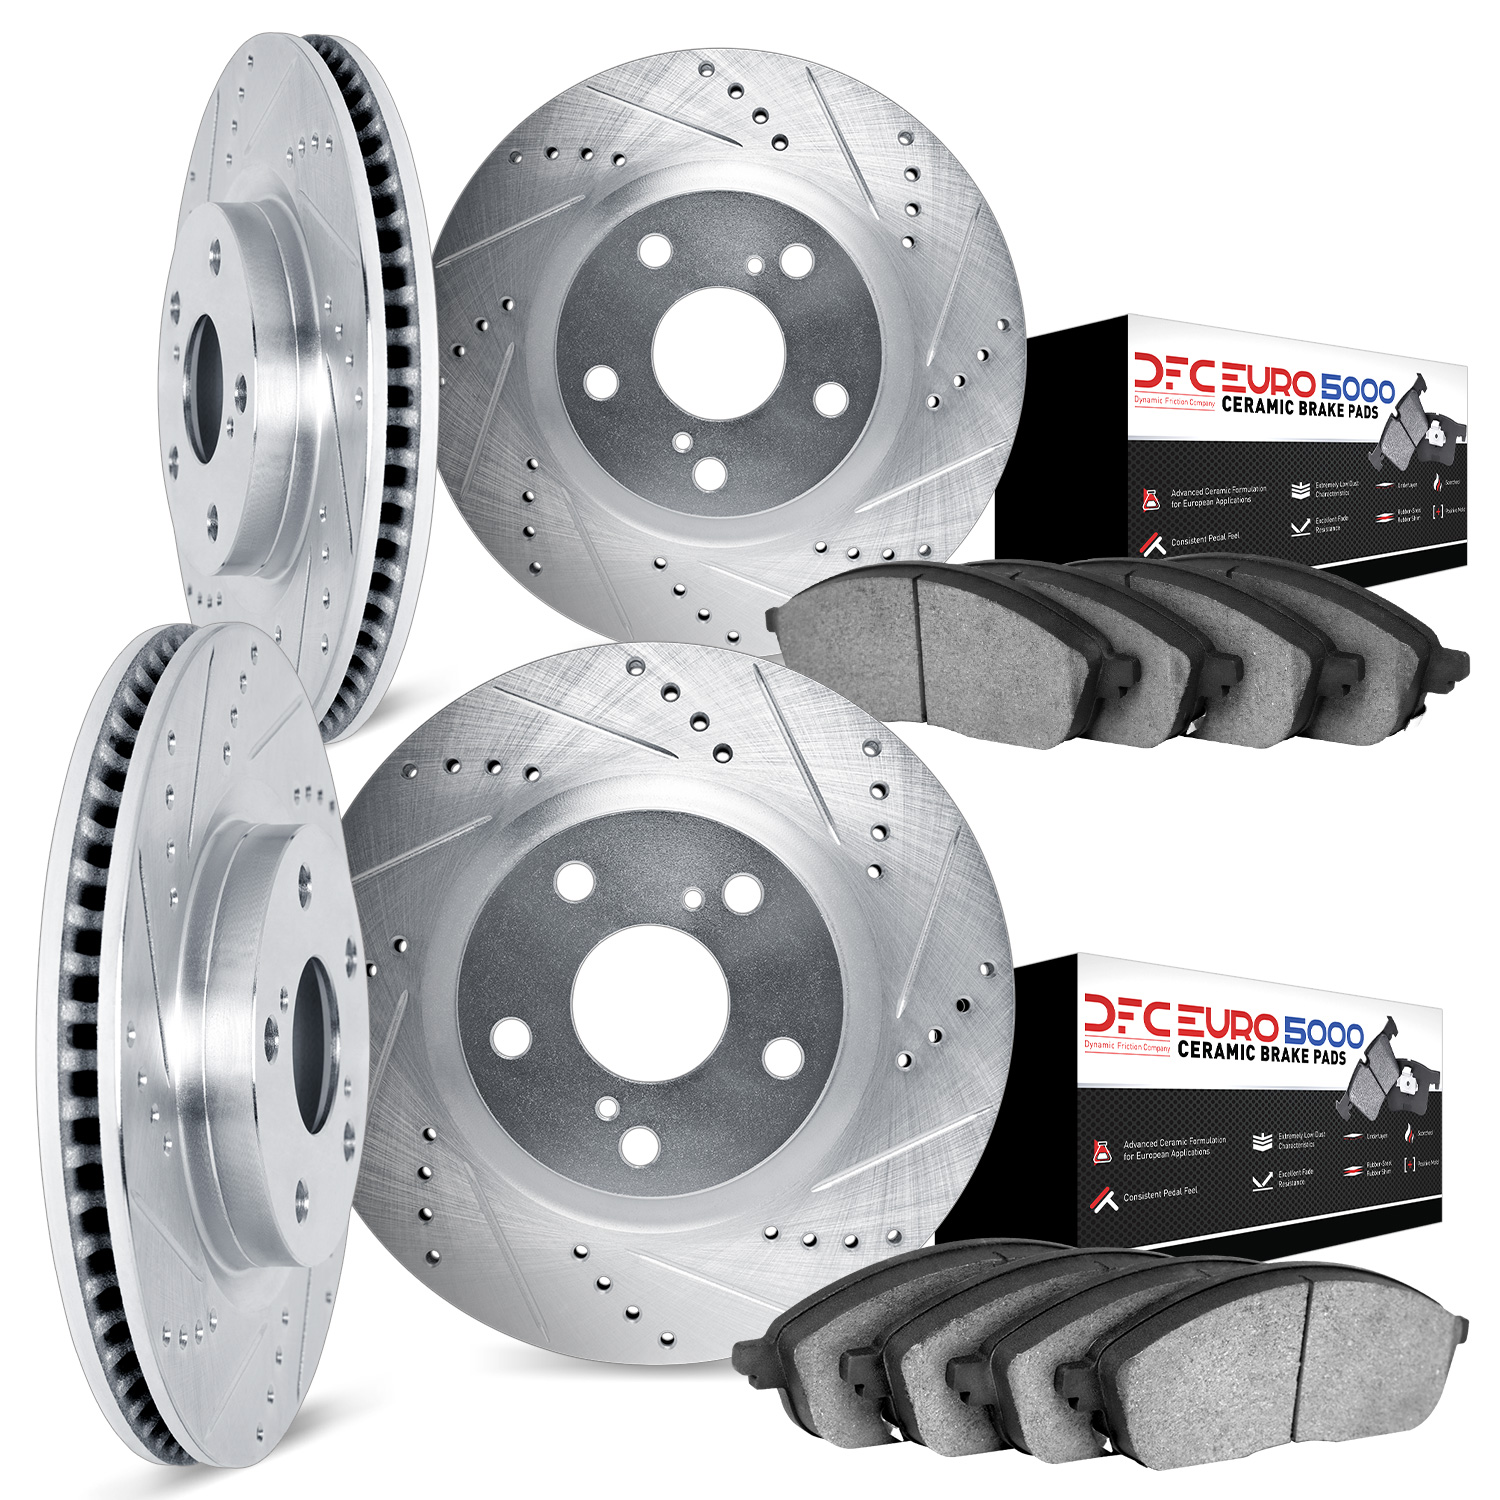 7604-75002 Drilled/Slotted Brake Rotors w/5000 Euro Ceramic Brake Pads Kit [Silver], Fits Select Lexus/Toyota/Scion, Position: F